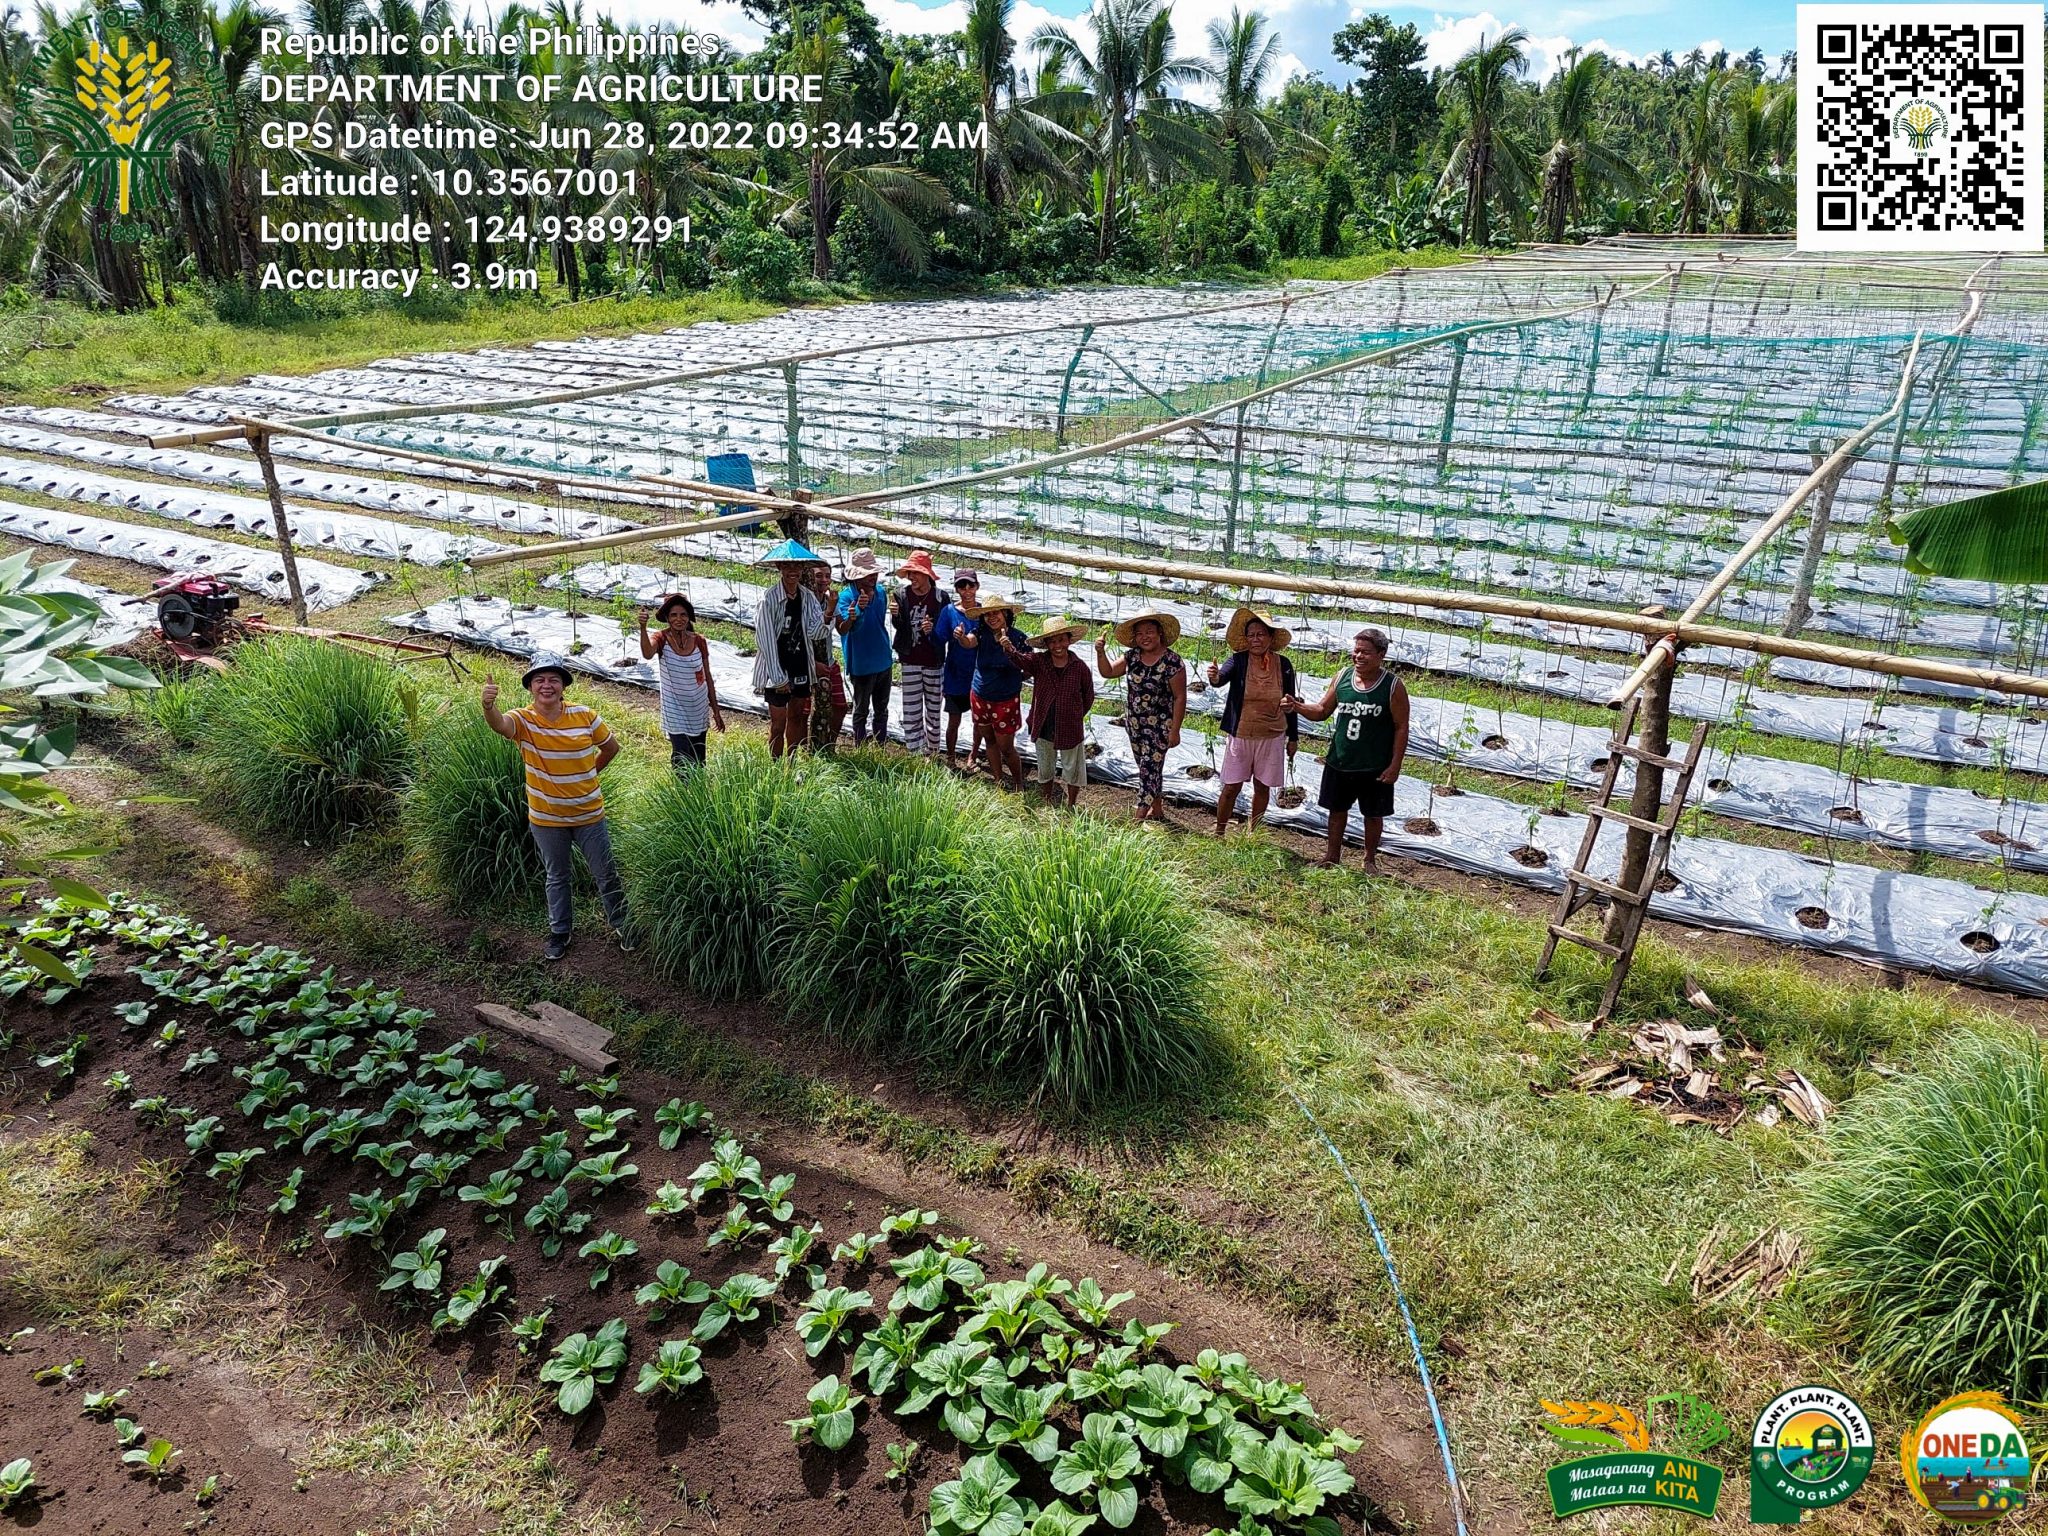 Southern Leyte vegetable farmers' resiliency amid typhoons proves fruitful